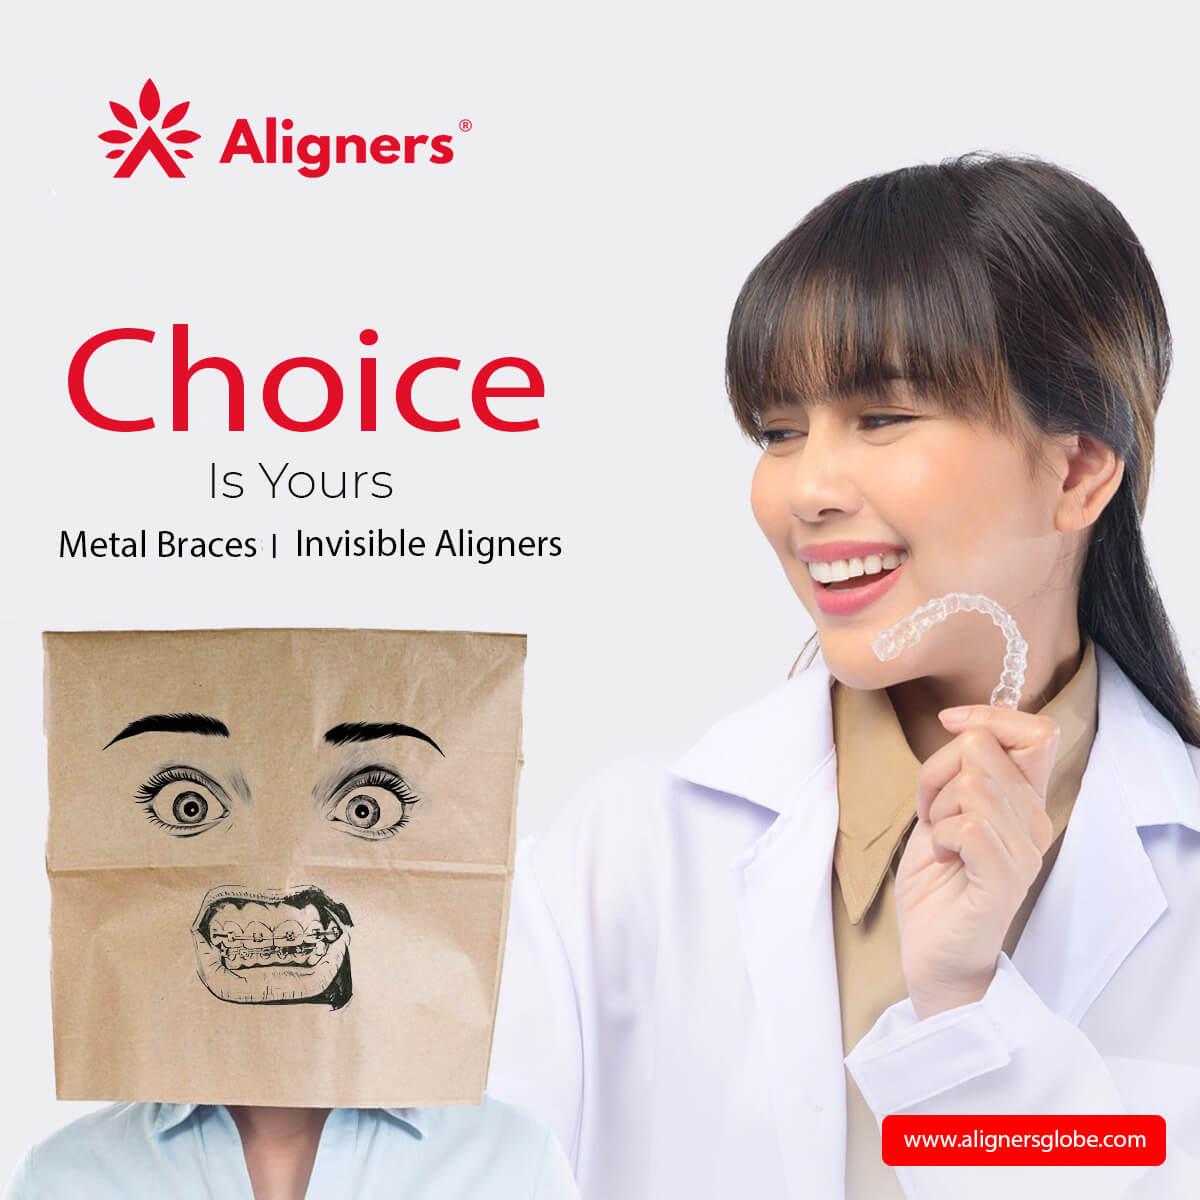 Aligners is a Invisible braces better than a metal braces